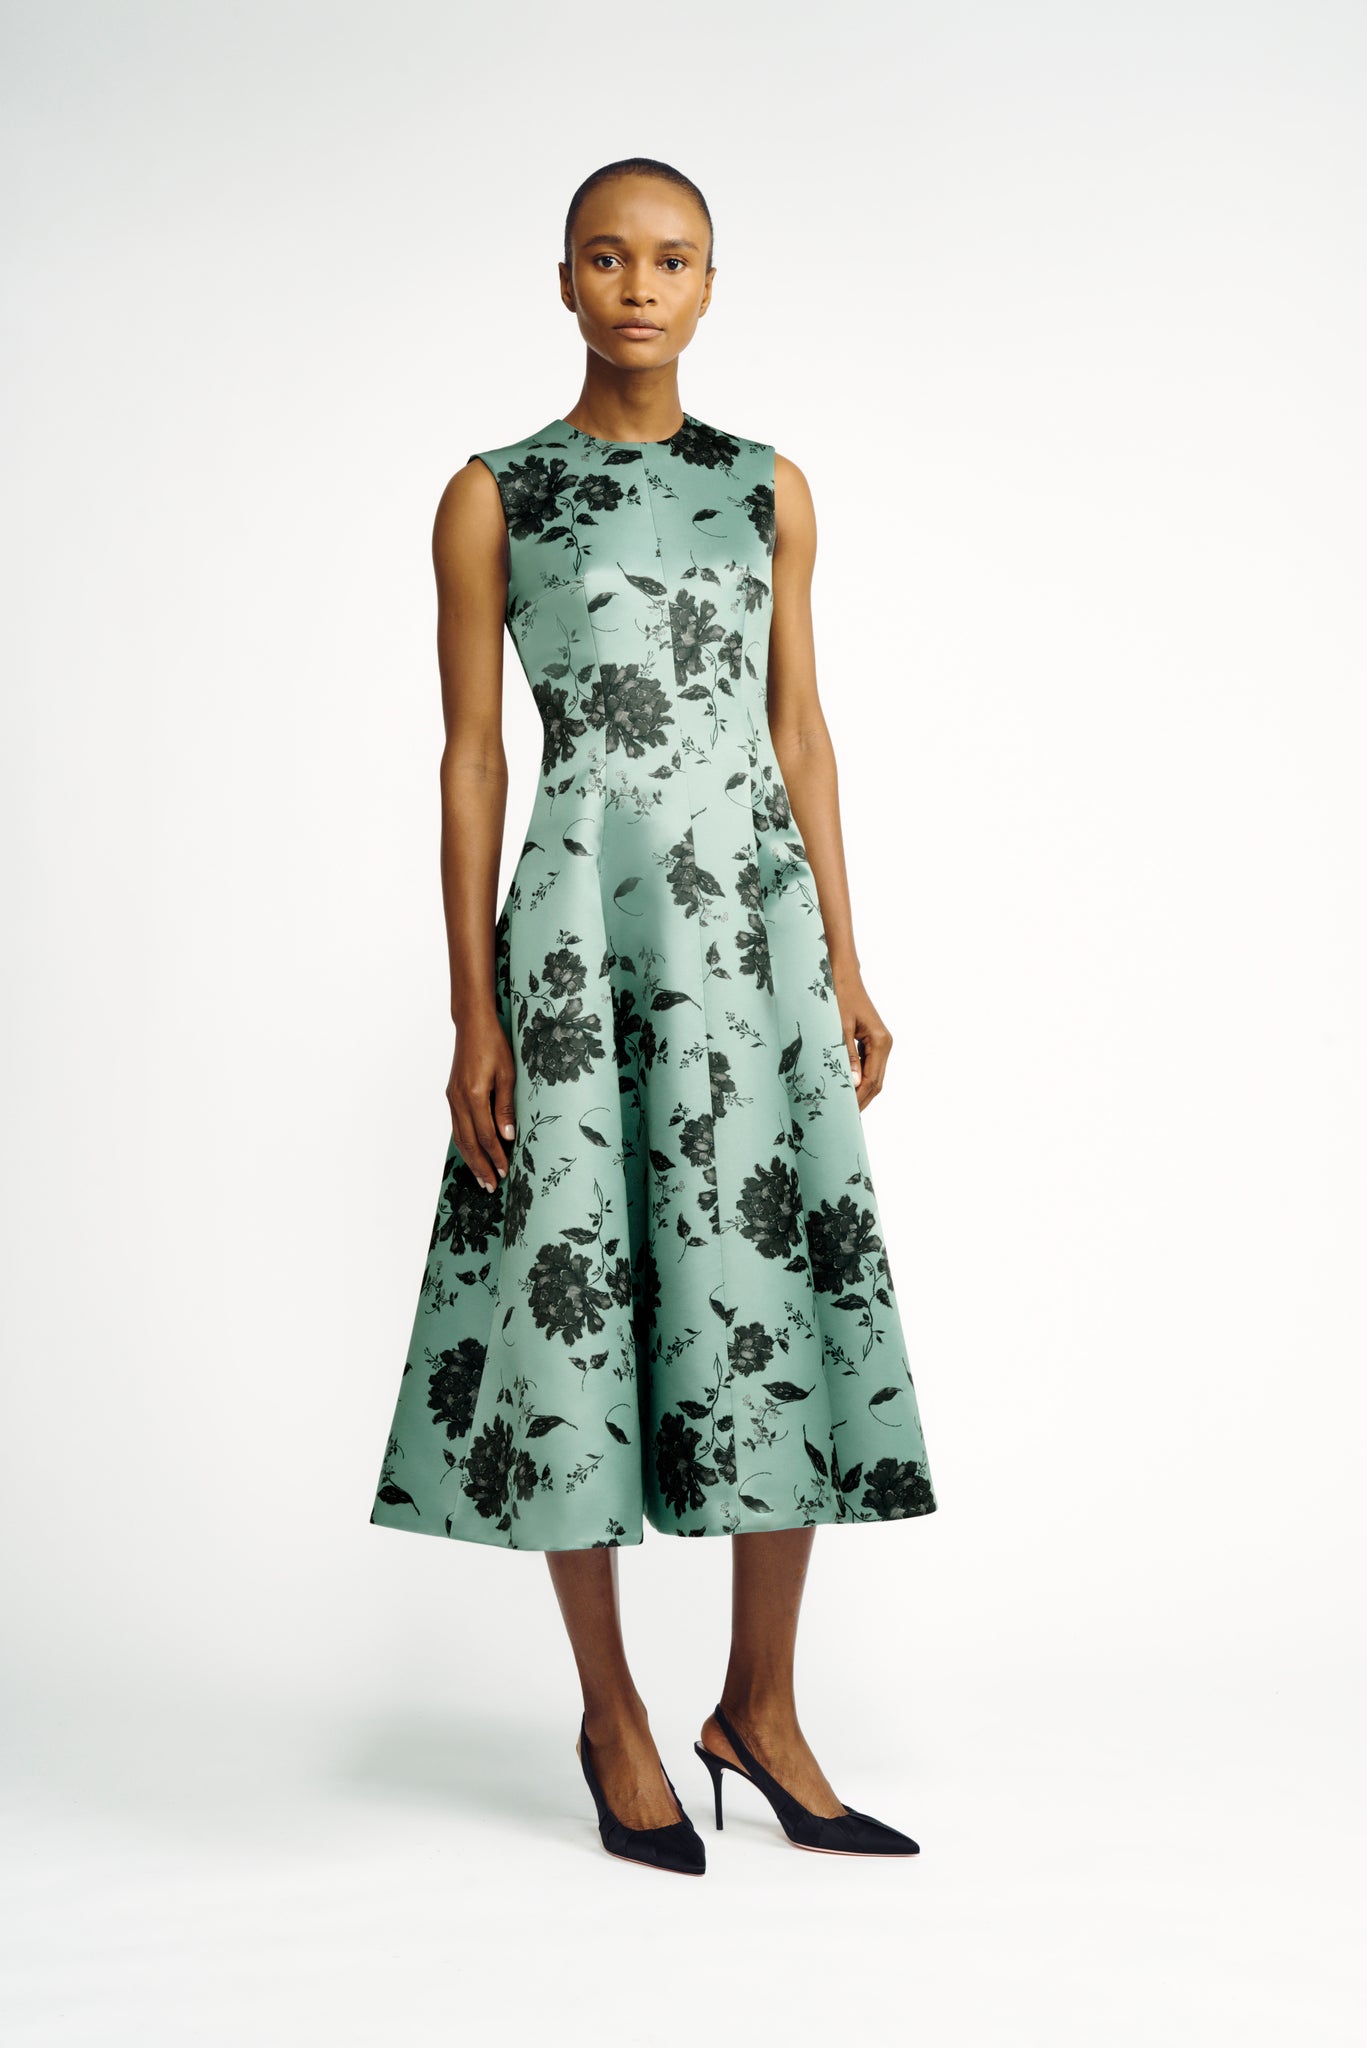 Mara Dress | Pistachio and Black Floral Printed Sleeveless Fit-and-Flare Dress | Emilia Wickstead